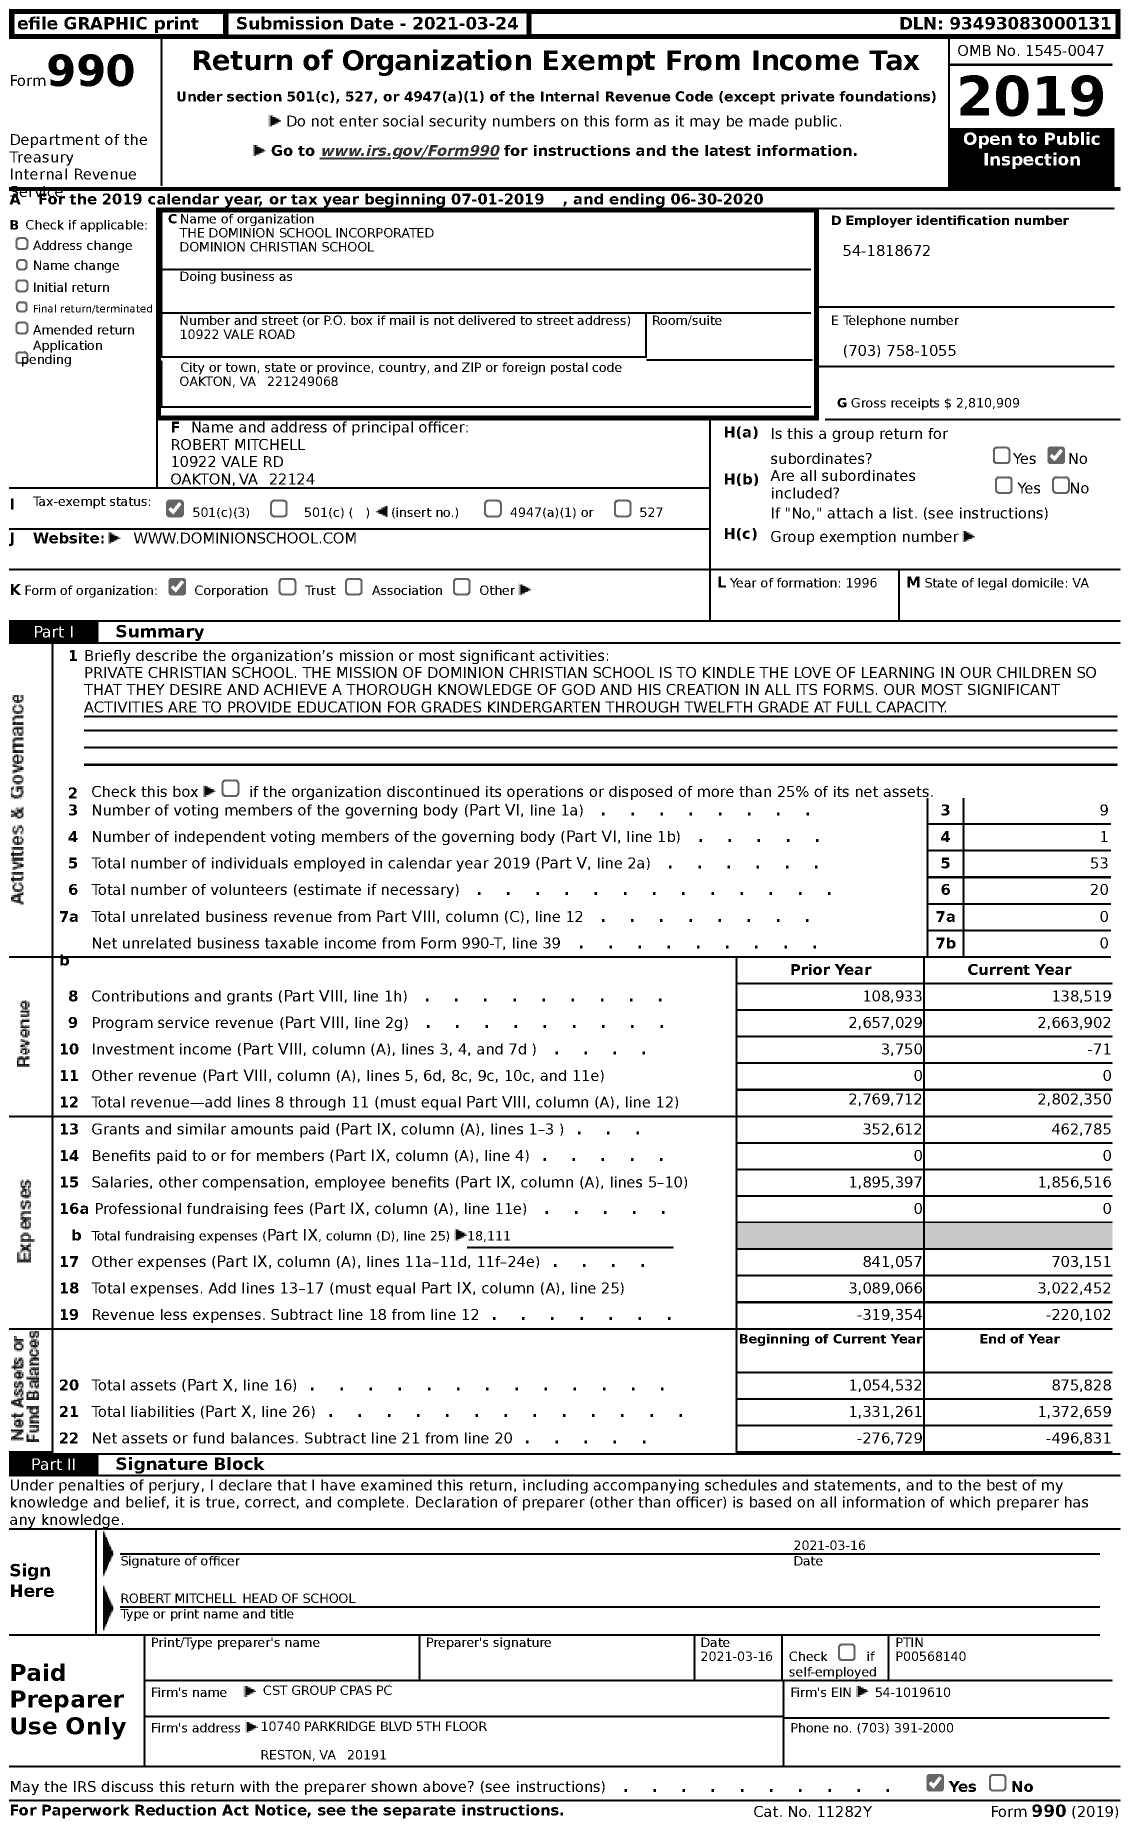 Image of first page of 2019 Form 990 for The Dominion School Incorporated Dominion Christian School